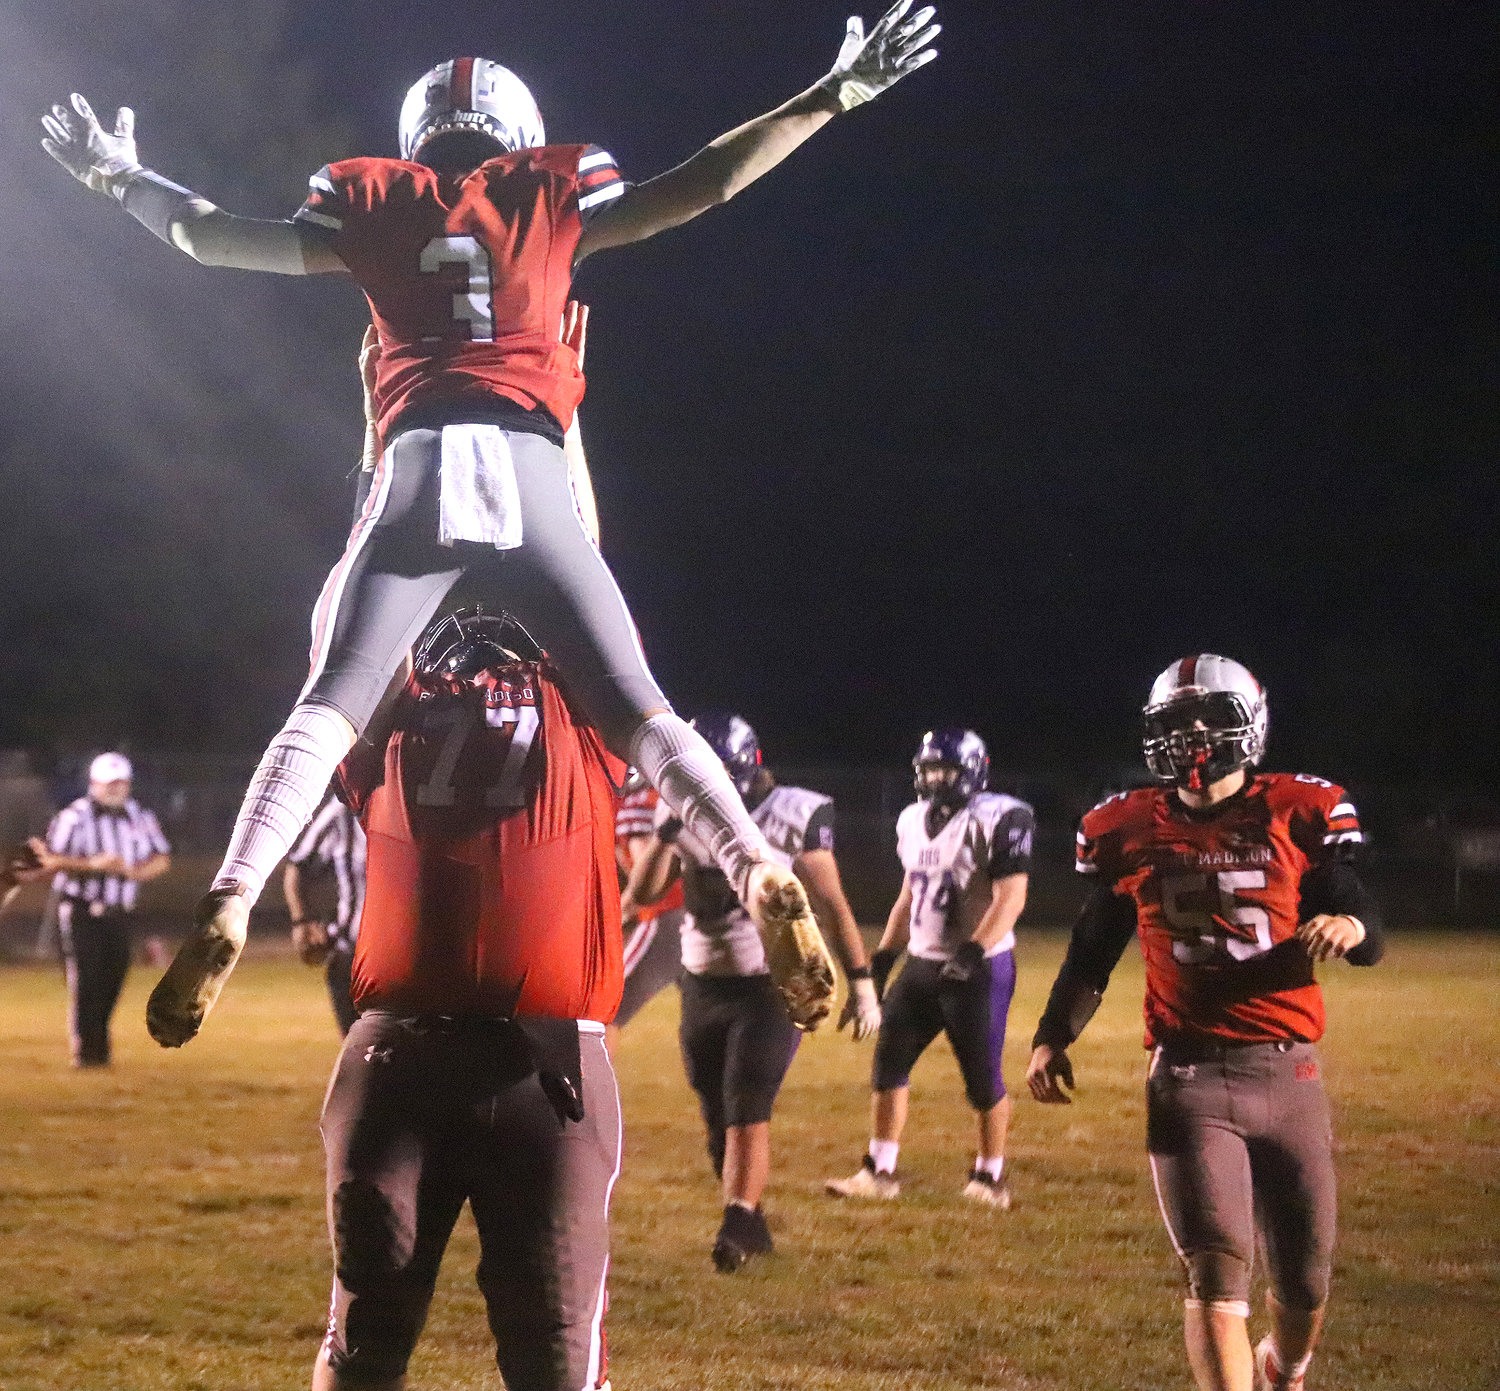 Fort Madison's Henry Wiseman gets thrown into the air by senior Matteo Lozano after Wiseman hauled in a 22-yard touchdown pass with :33 seconds left to give Fort Madison the win.